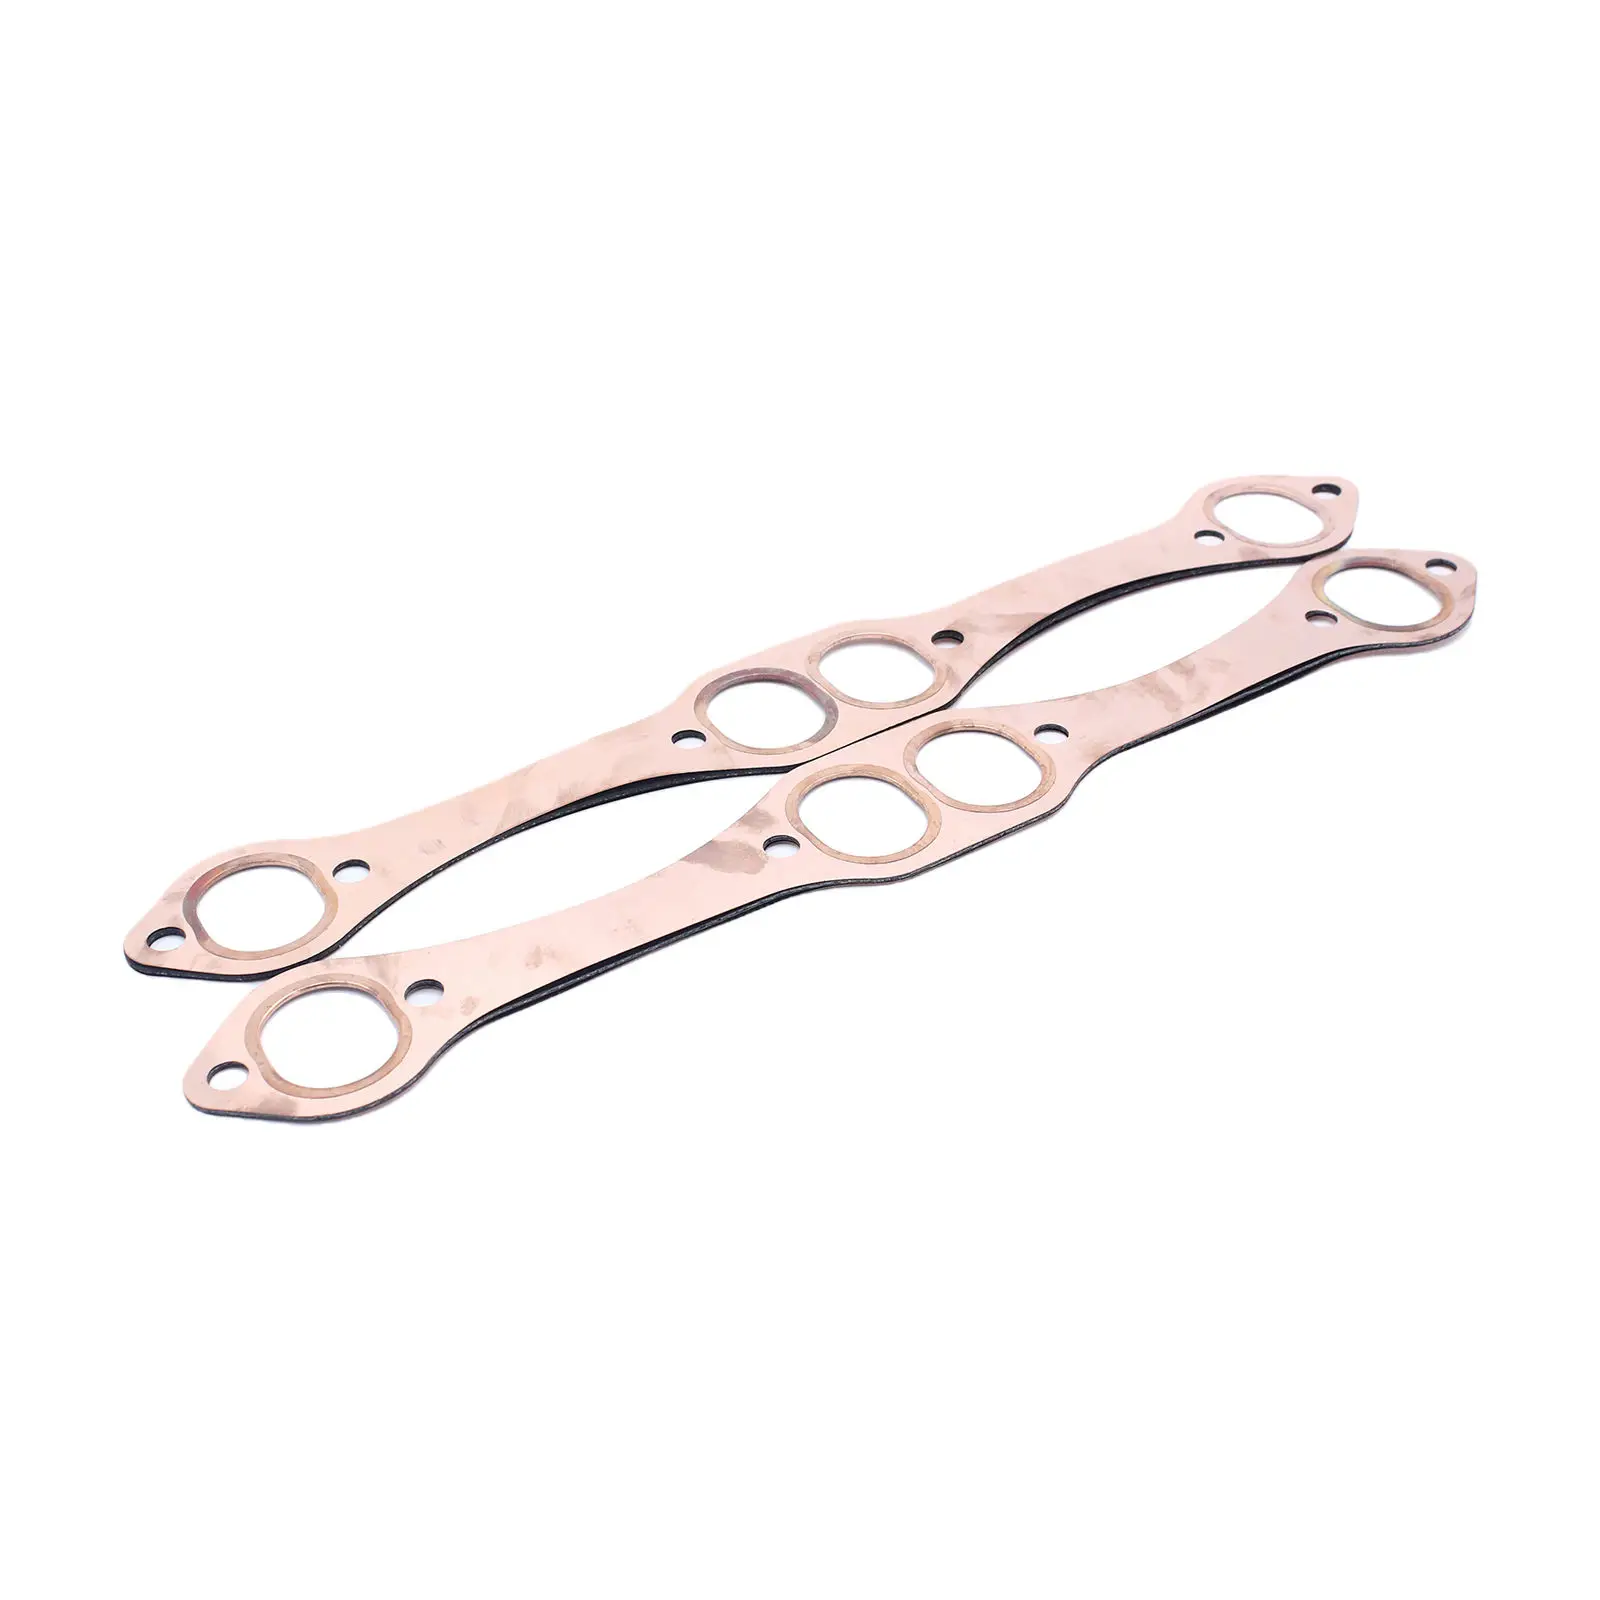 2pcs SBC Copper Header Exhaust Gasket Seal For Chevy SB 327 305 350 383 Exhaust Manifold Gasket Set